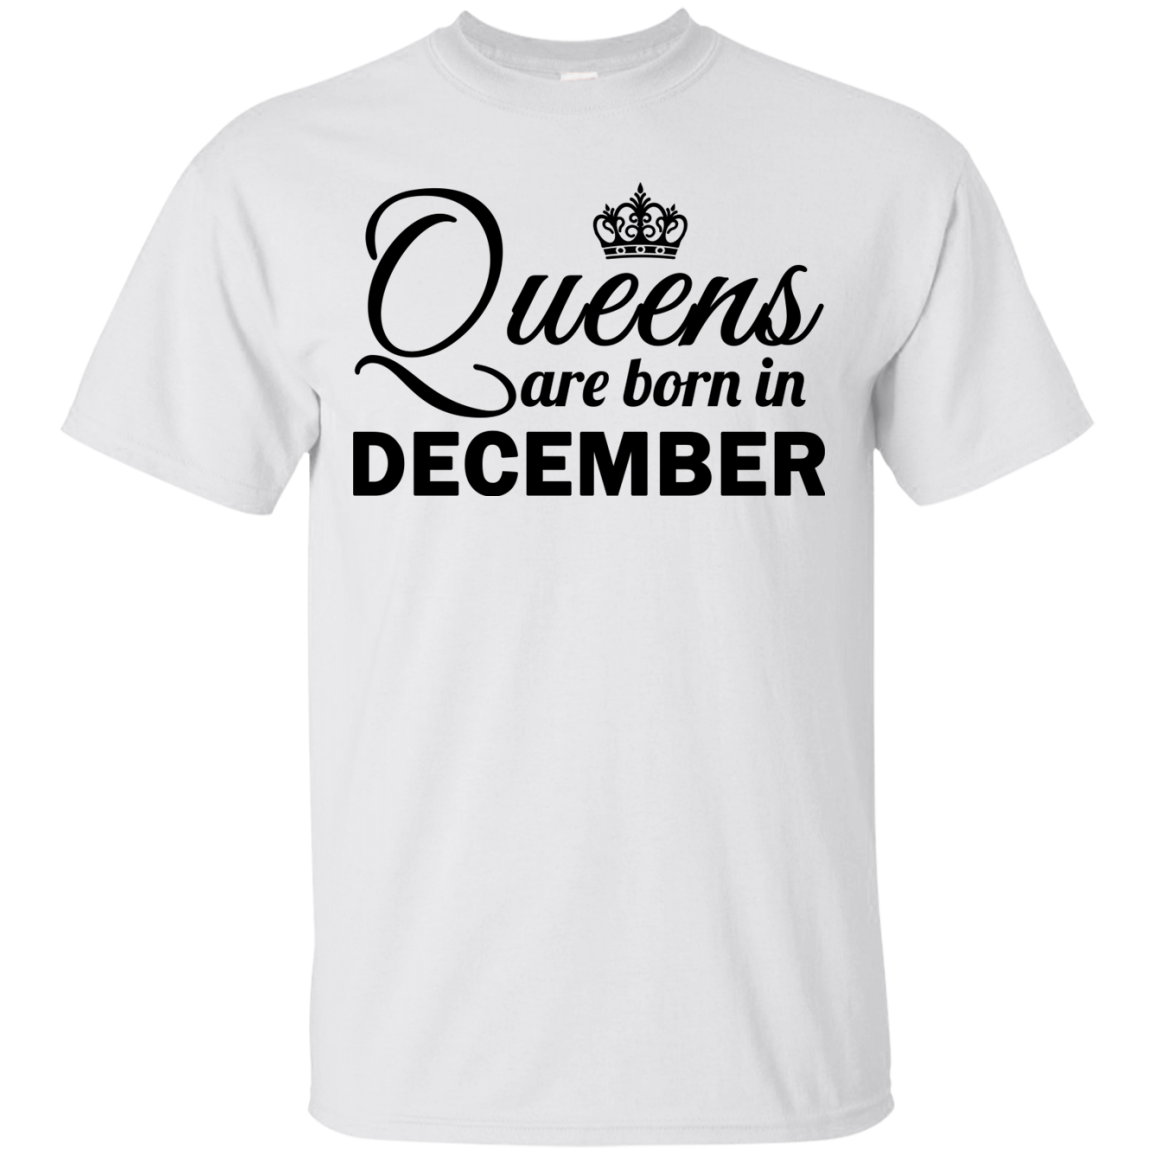 Queens are born in December shirt, tank top, sweater